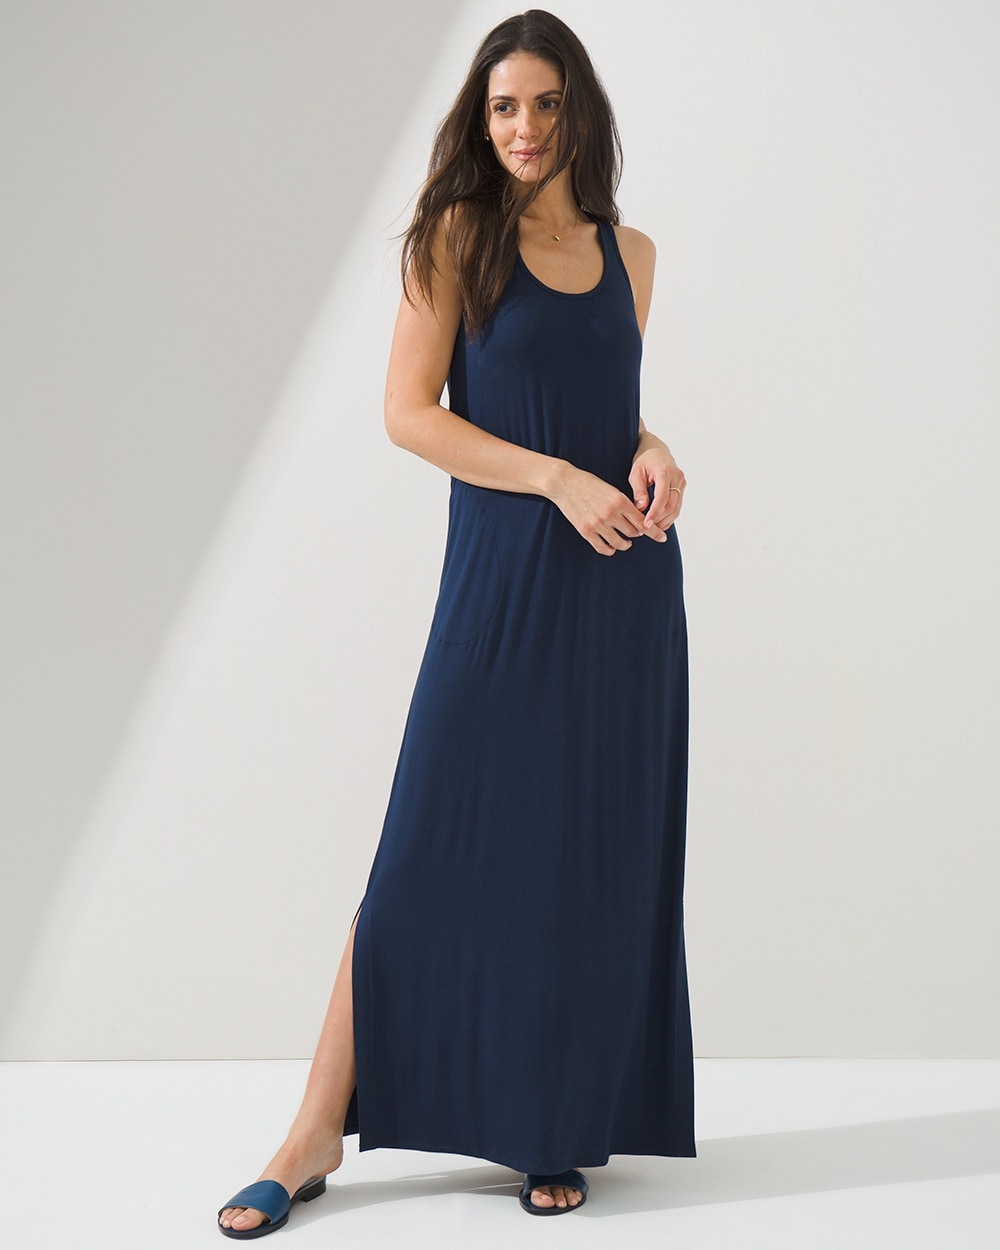 Racerback Maxi Dress with Built-In Bra - Soma